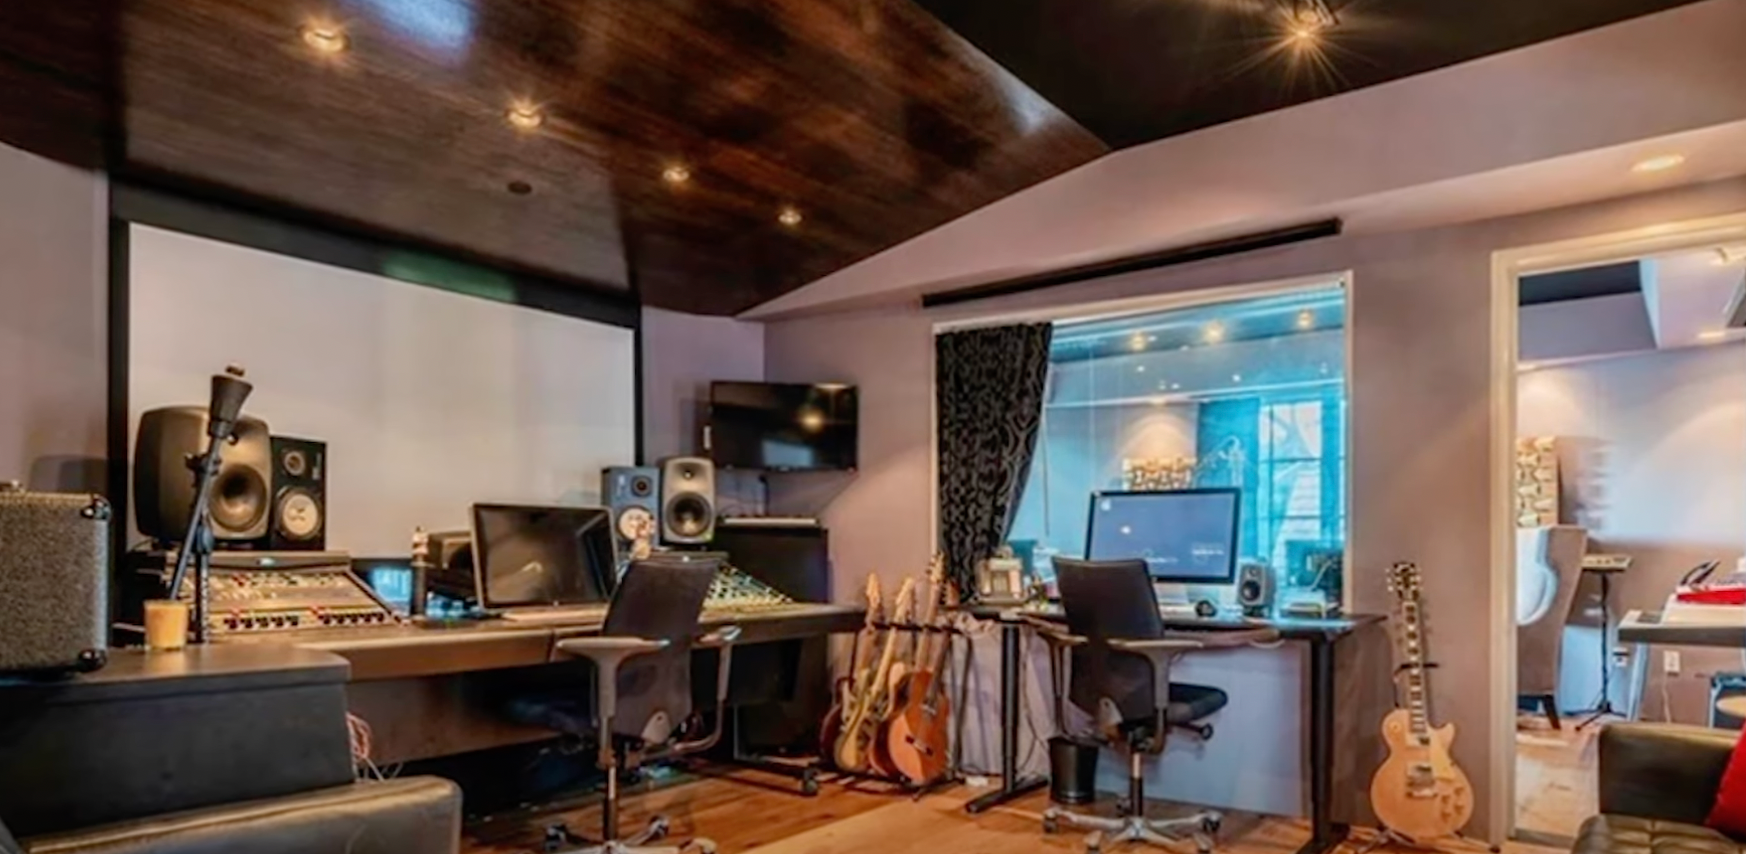 John Stamos' recording studio in his home in Los Angeles | Source: YouTube@FamousEntertainment